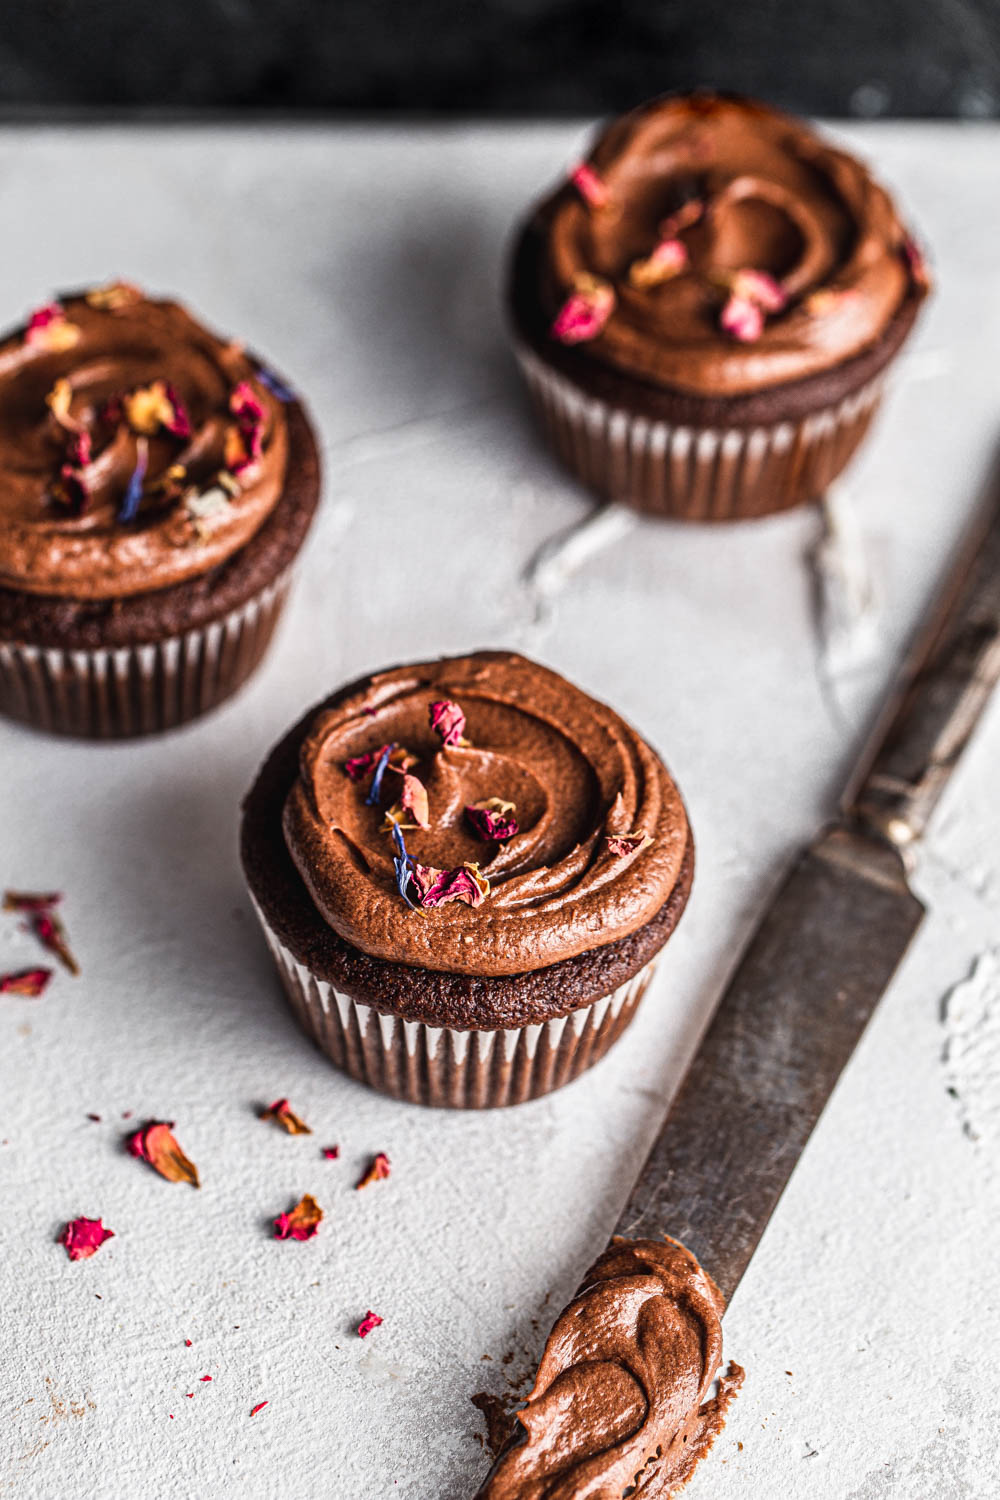 keto chocolate cupcakes with chocolate frosting and edible flowers food photography